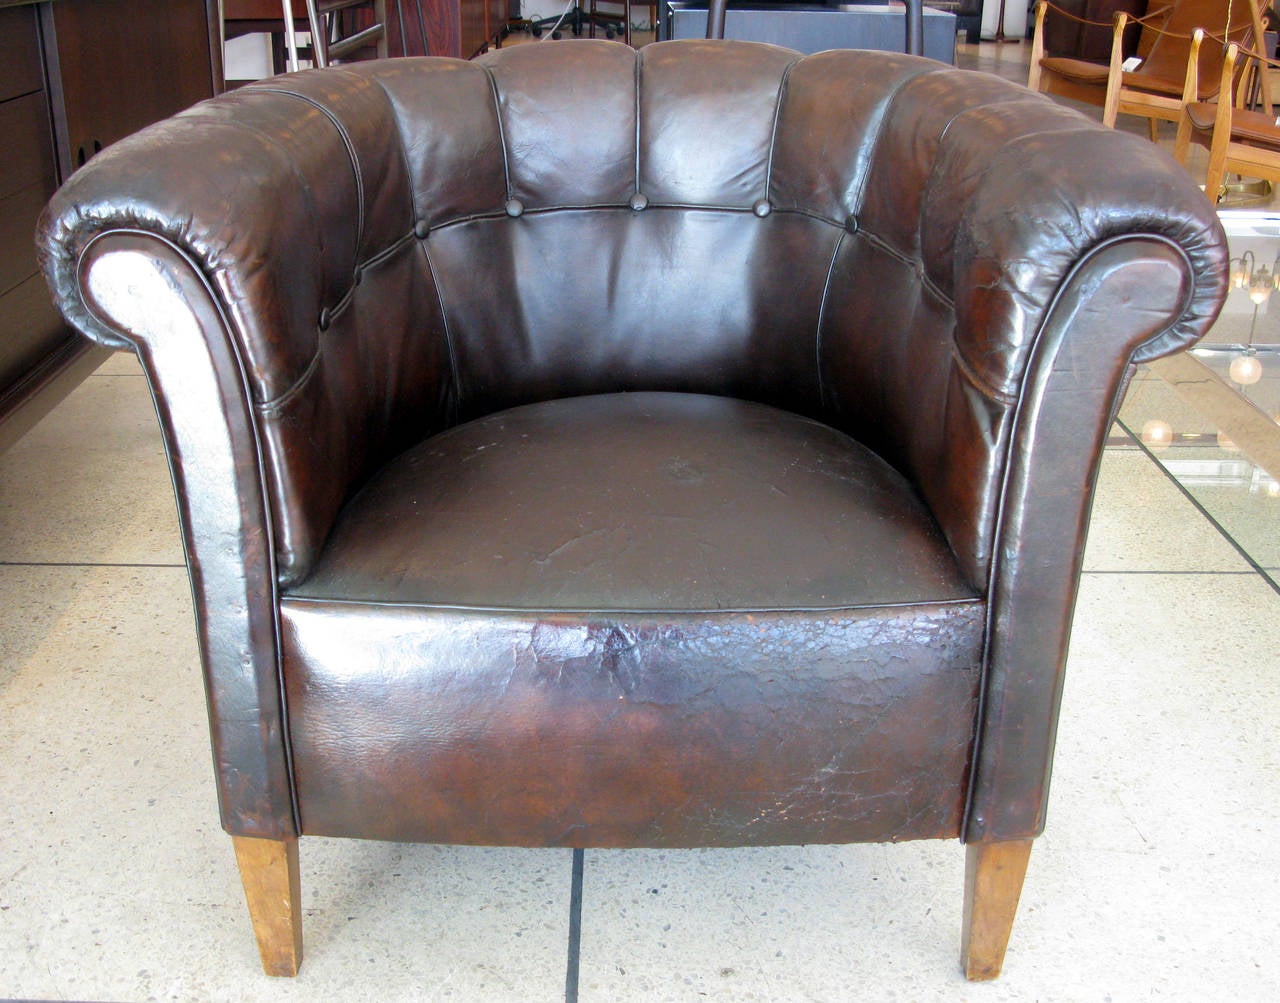 Single leather club chair from Denmark upholstered in dark chocolate, patinated leather. Leather is very old and a bit fragile with cracking on the arms, seat and sides. Wooden legs. Seat height: 18